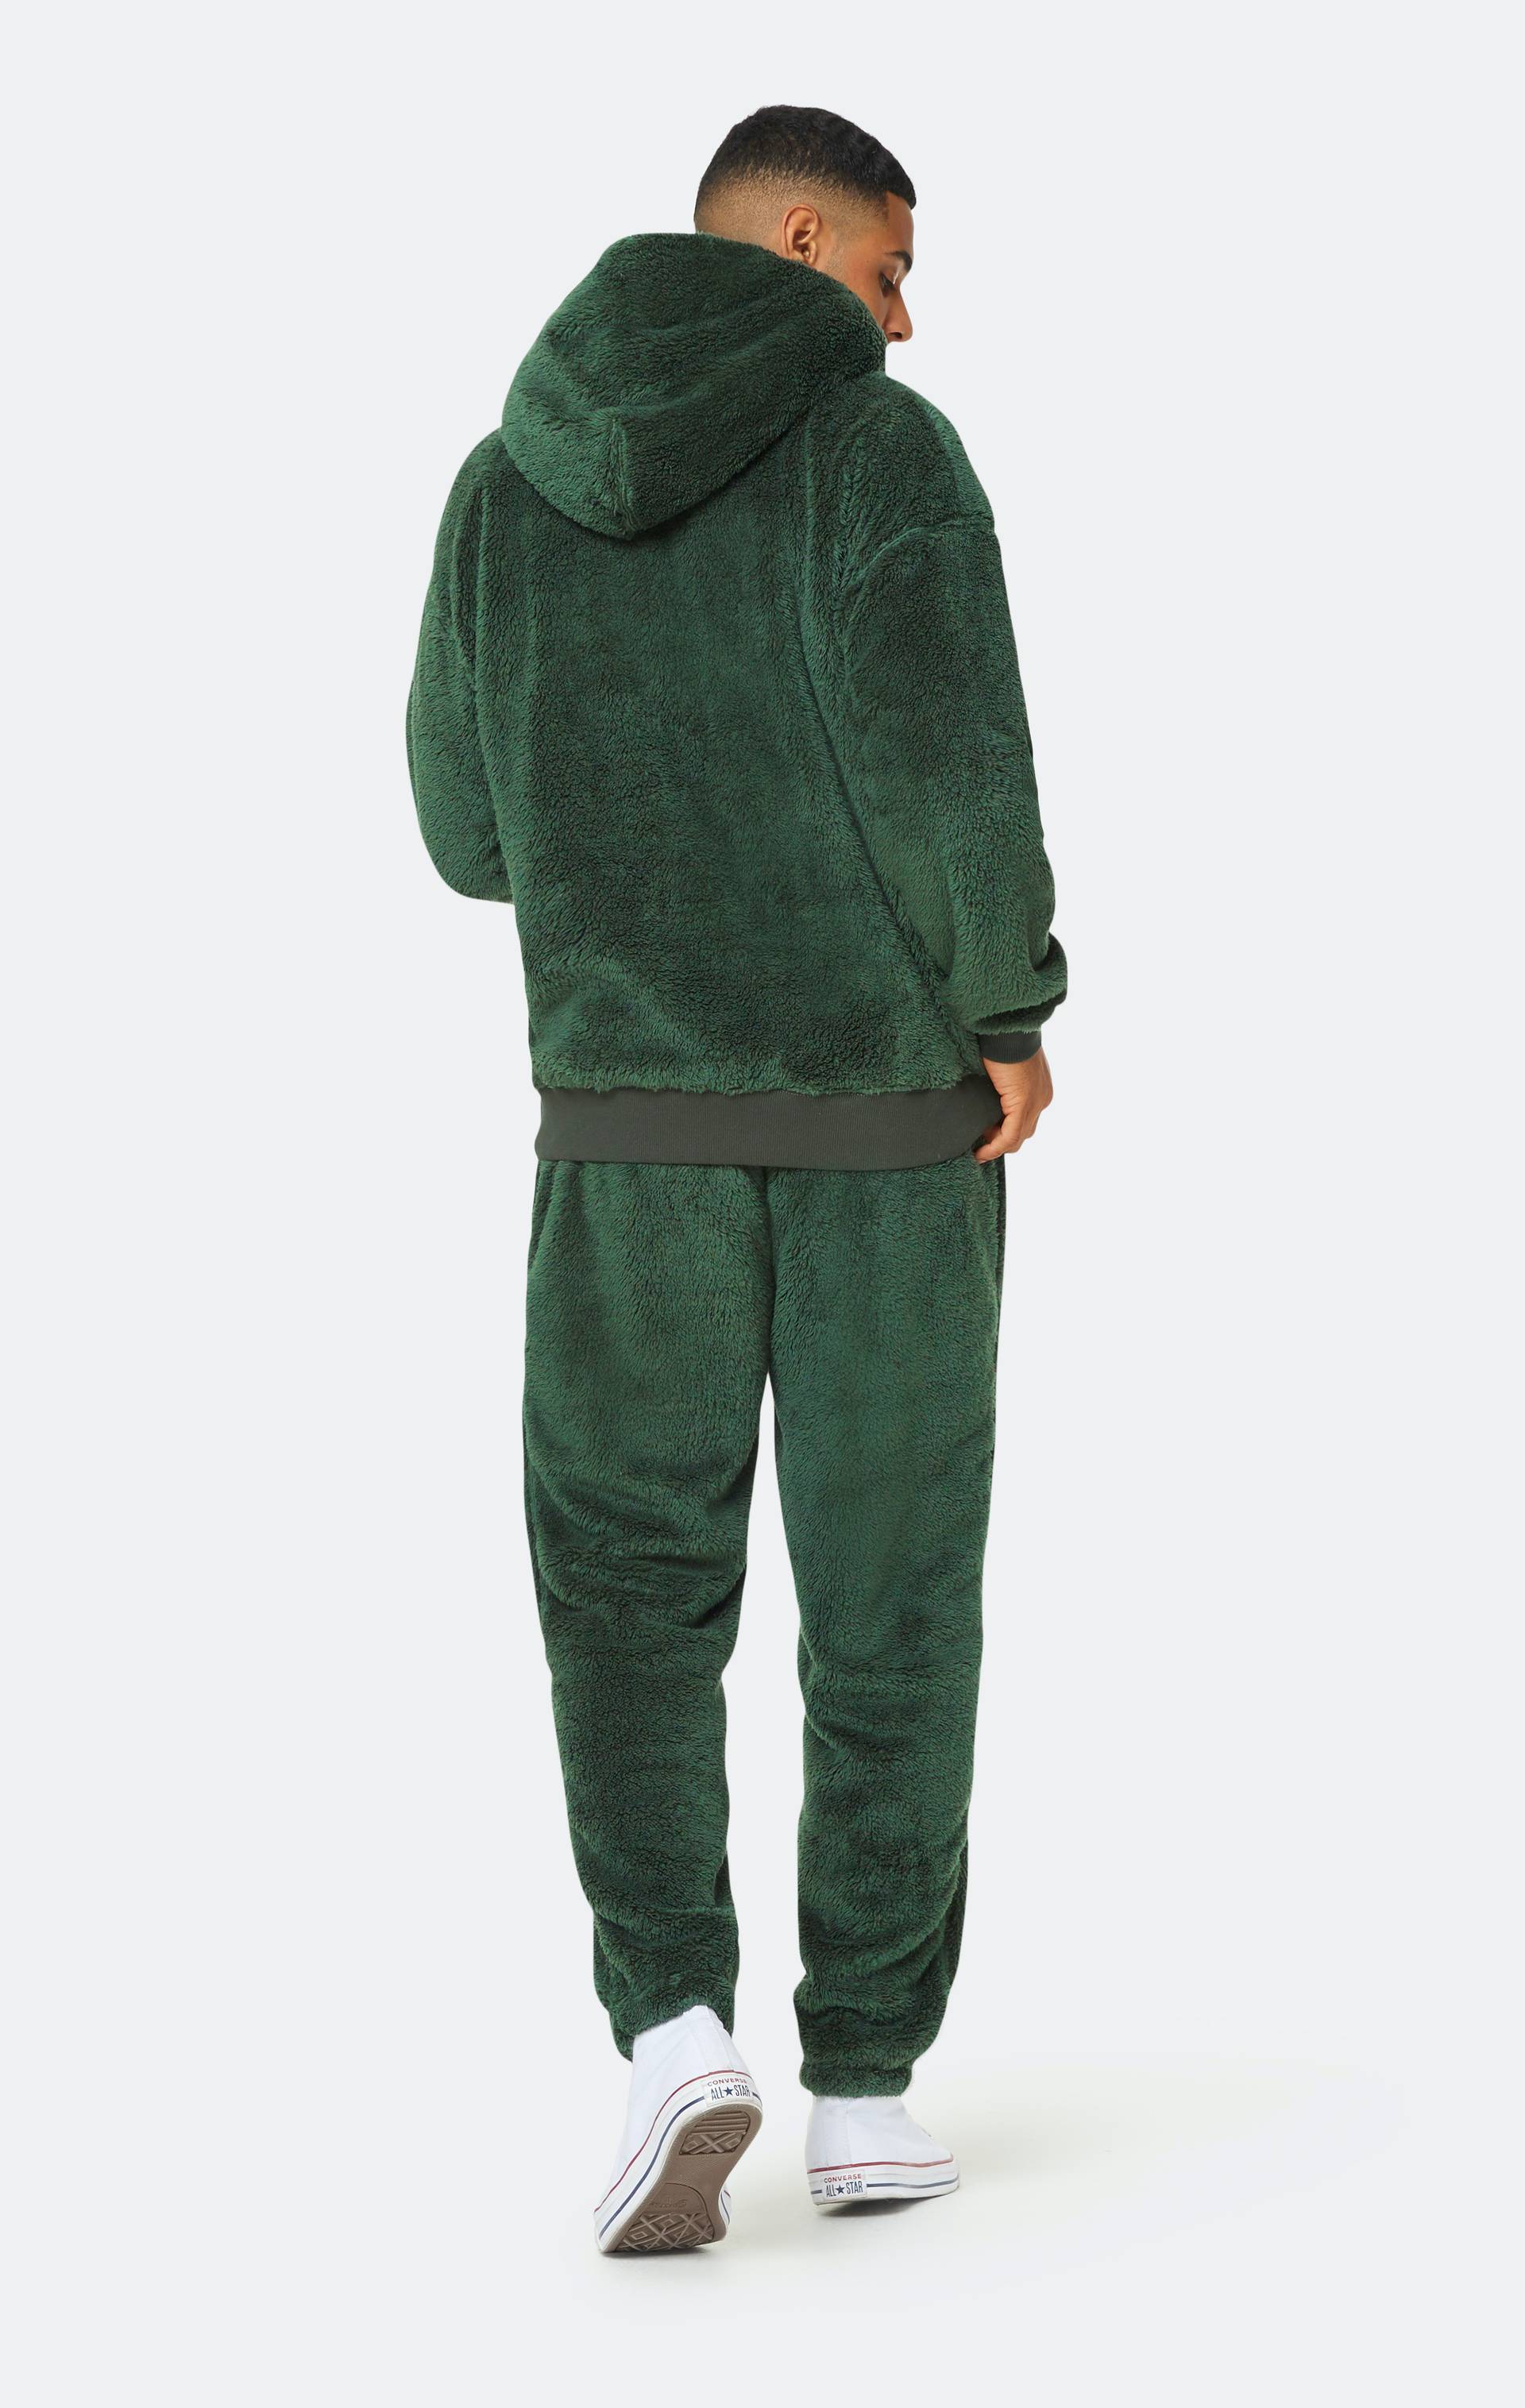 Onepiece The Puppy Pant Green - 5